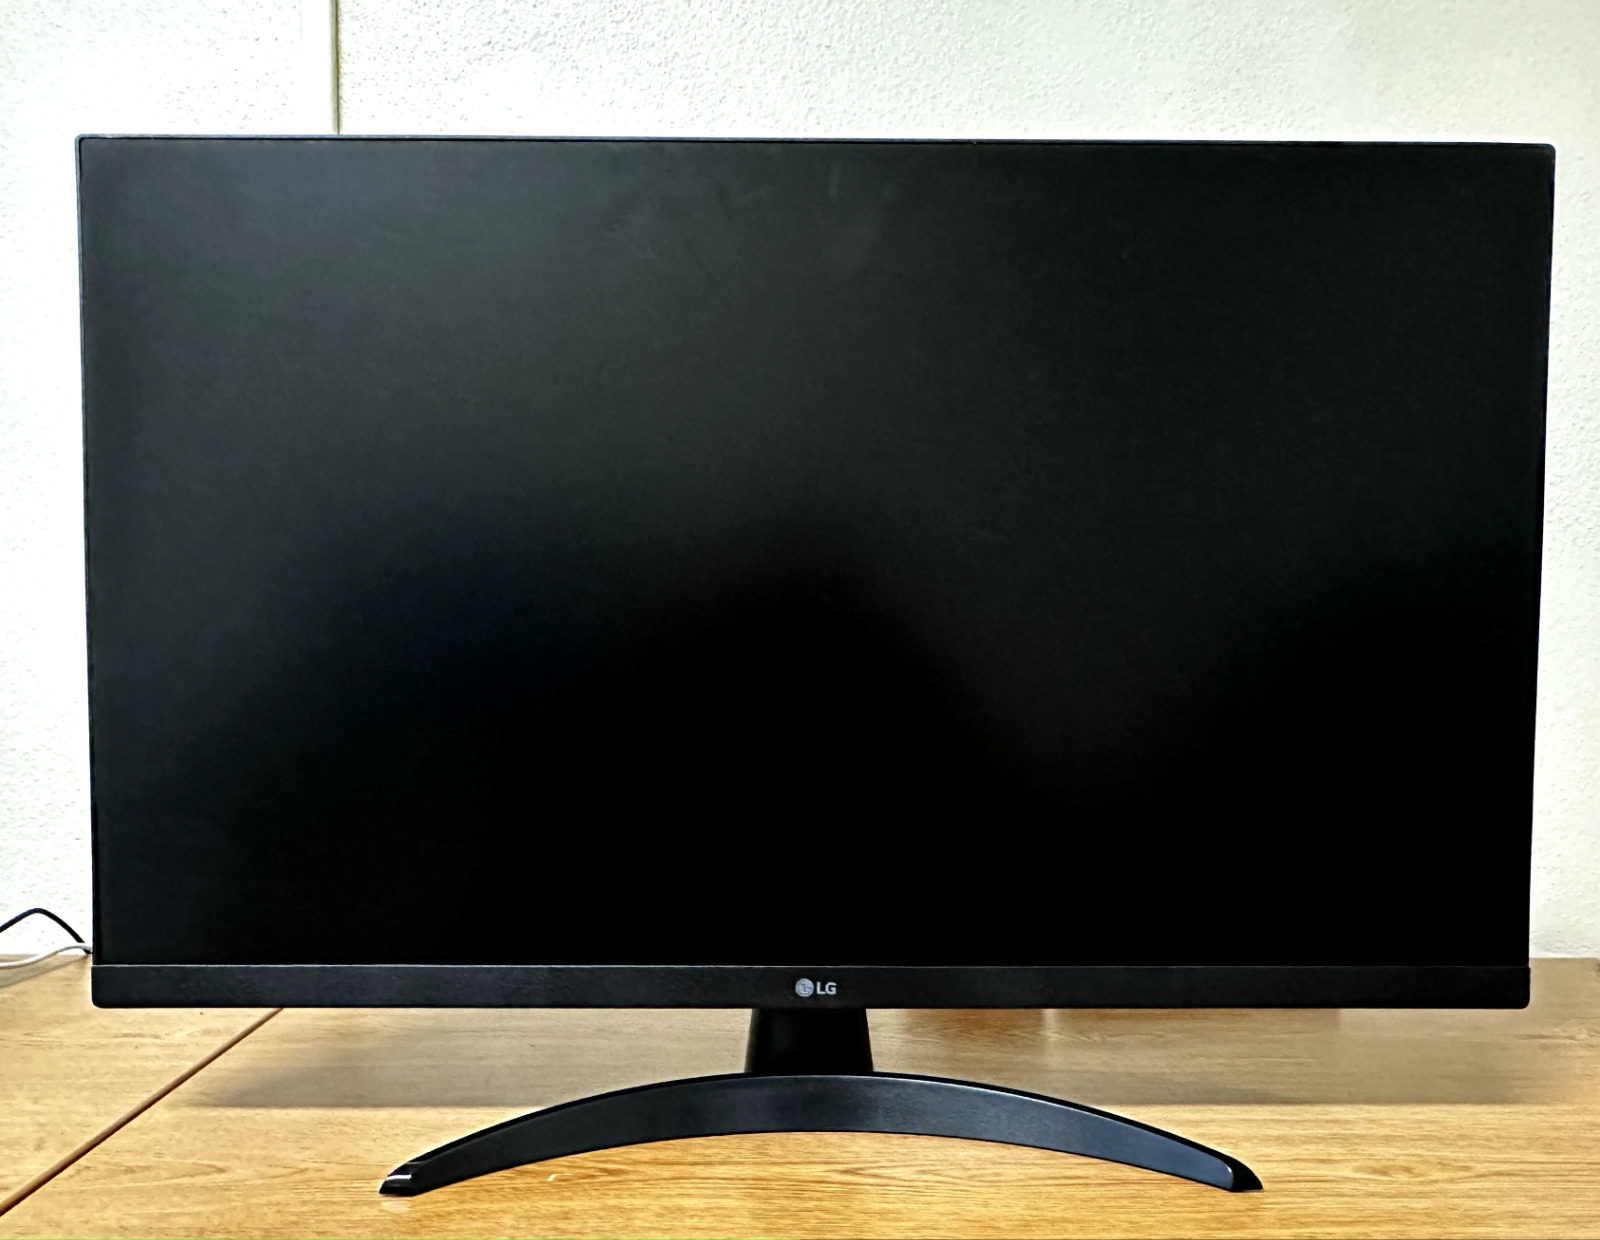 LG 27” Inch Full HD (1920 x 1080) IPS TV / Monitor with Dual 5W Built-In